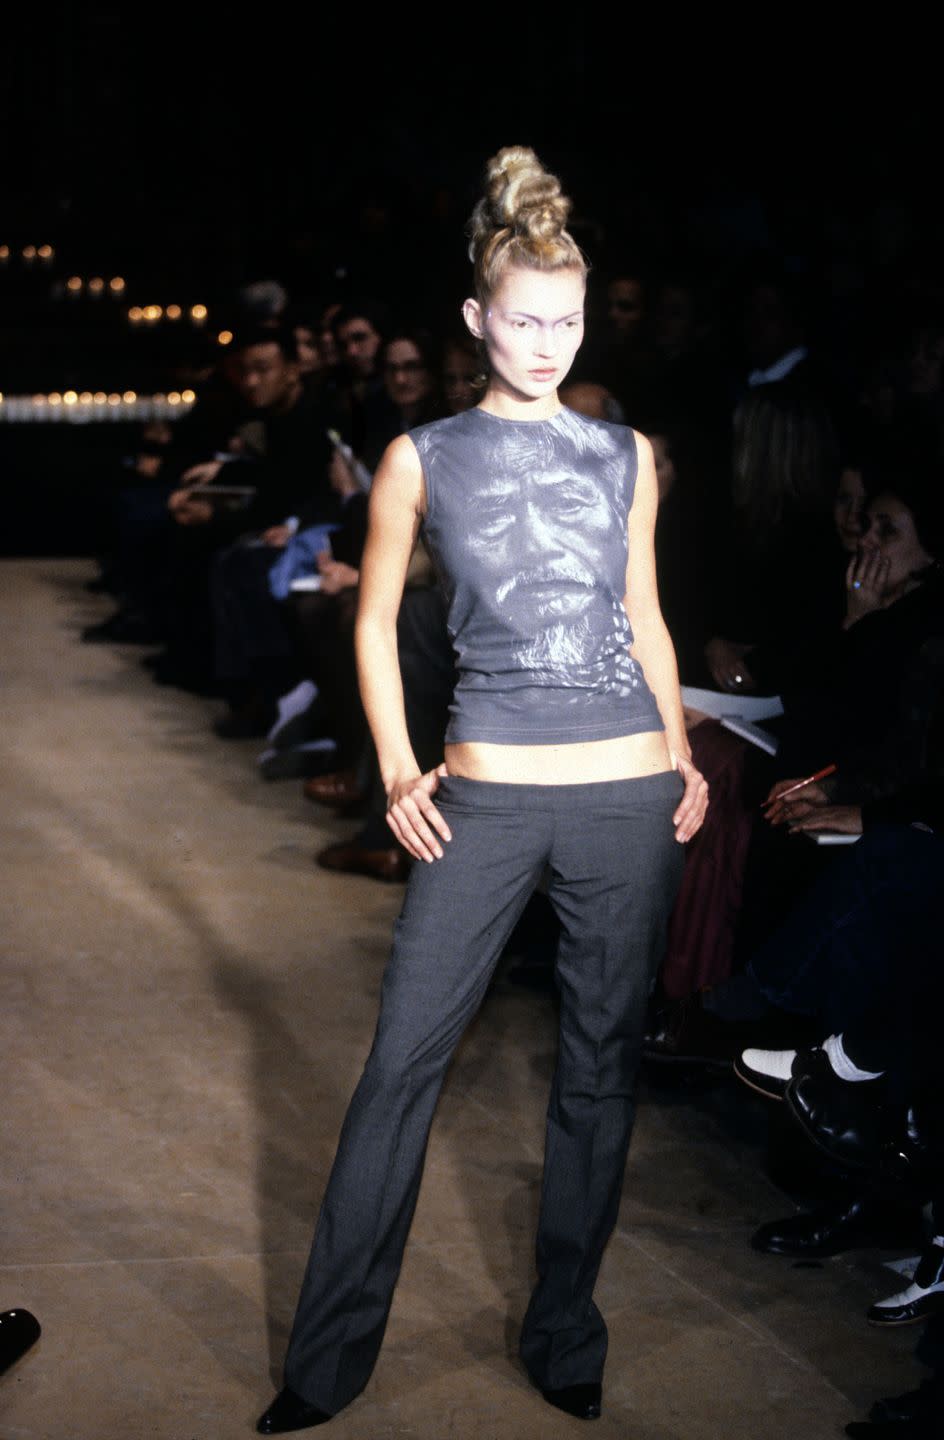 kate moss wearing sleeveless photo print top with low rise black trousers in the alexander mcqueen fallwinter 1996 ready to wear show in new york photo by john aquinowwdpenske media via getty images